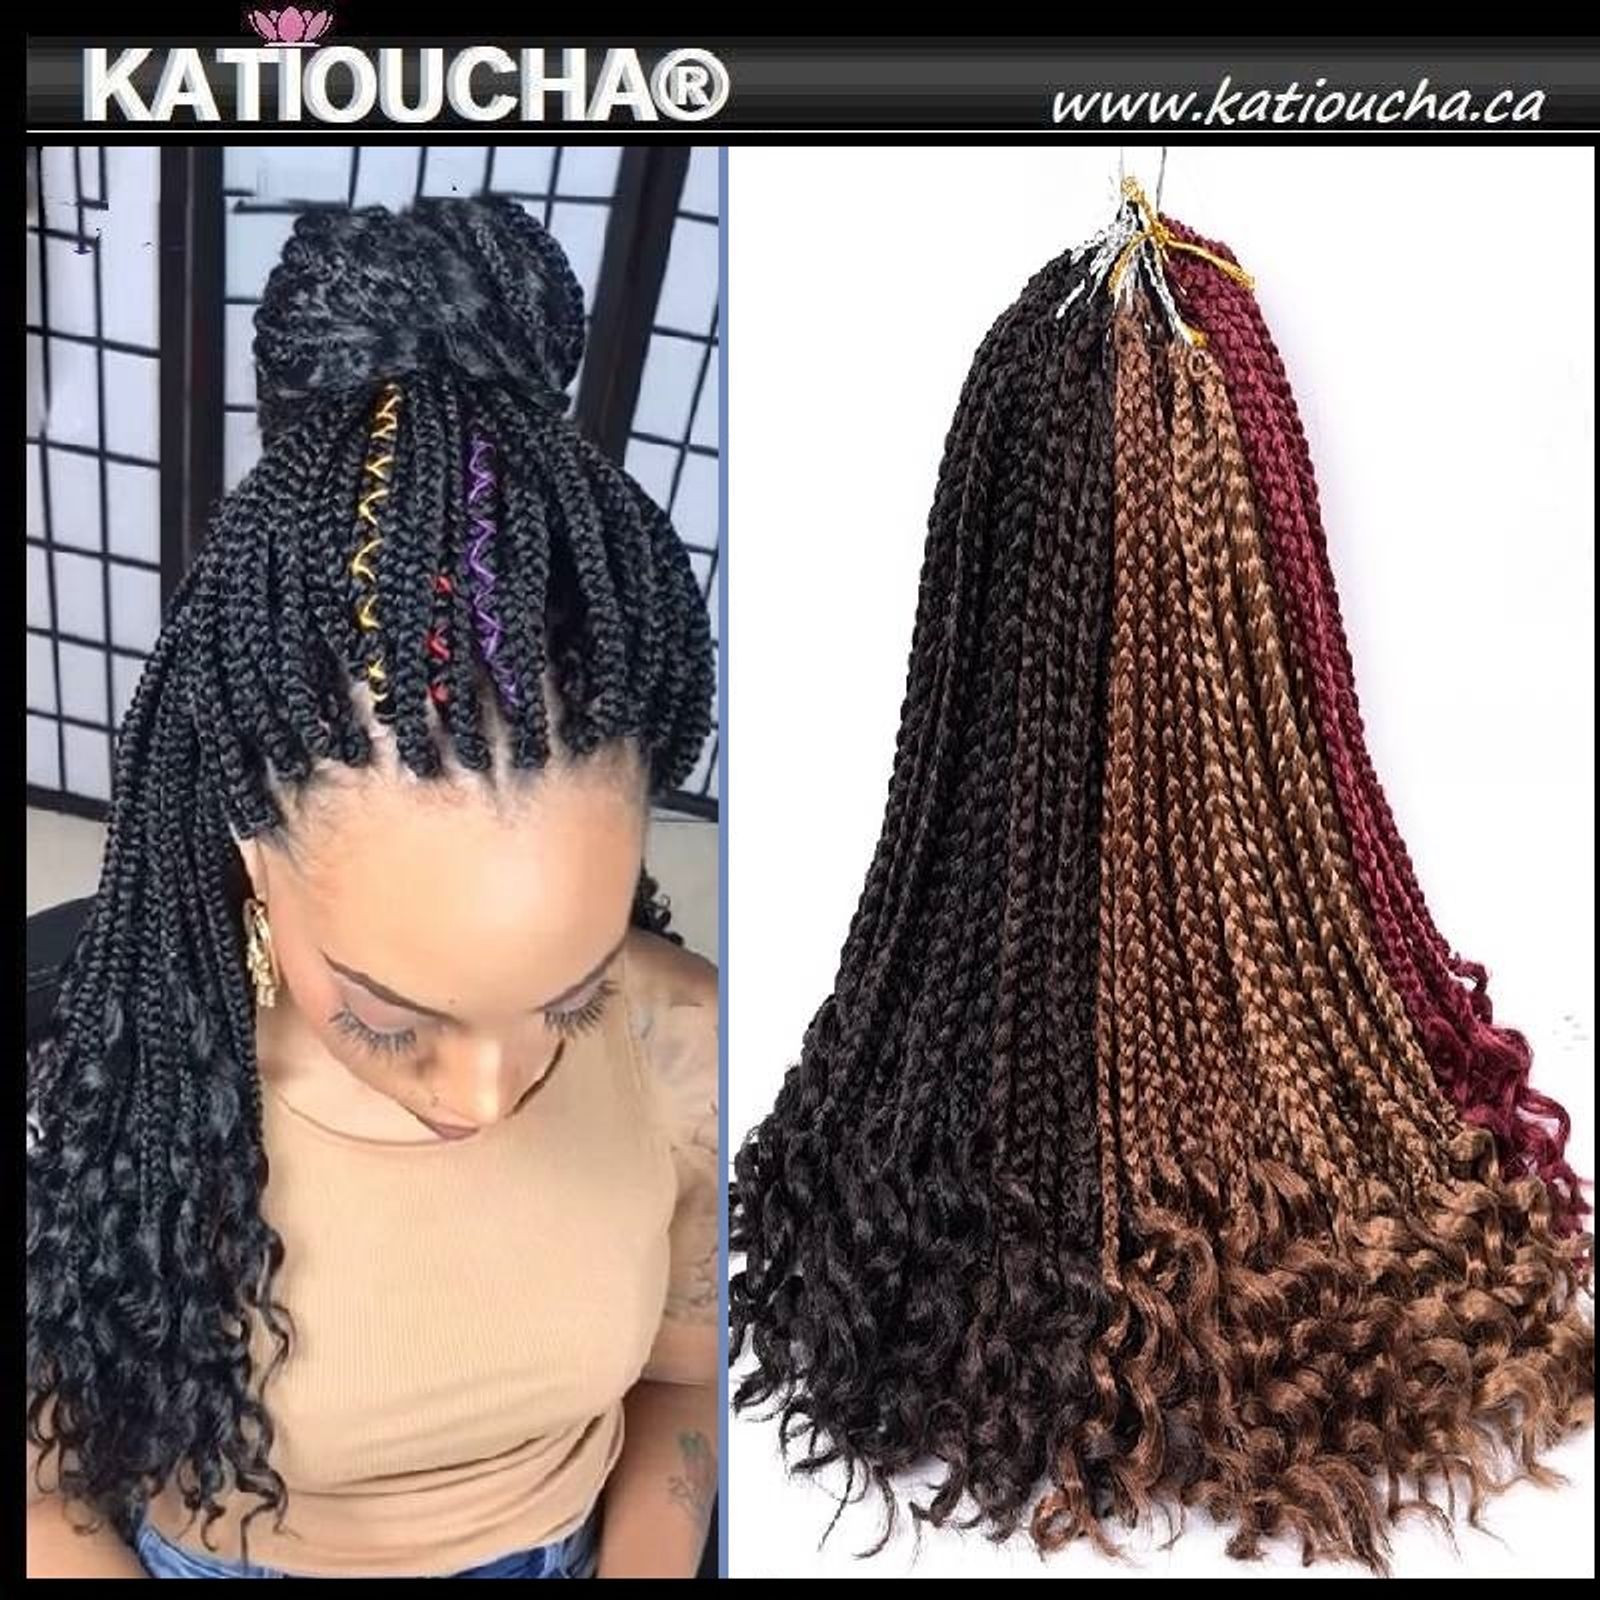 Katioucha Loose End Box Braid Crochet Hair Are Made Of High Quality Synthetic Fiber In Kinky Curly Style Discover Our Wide Selection Of Braiding Crochet Hair